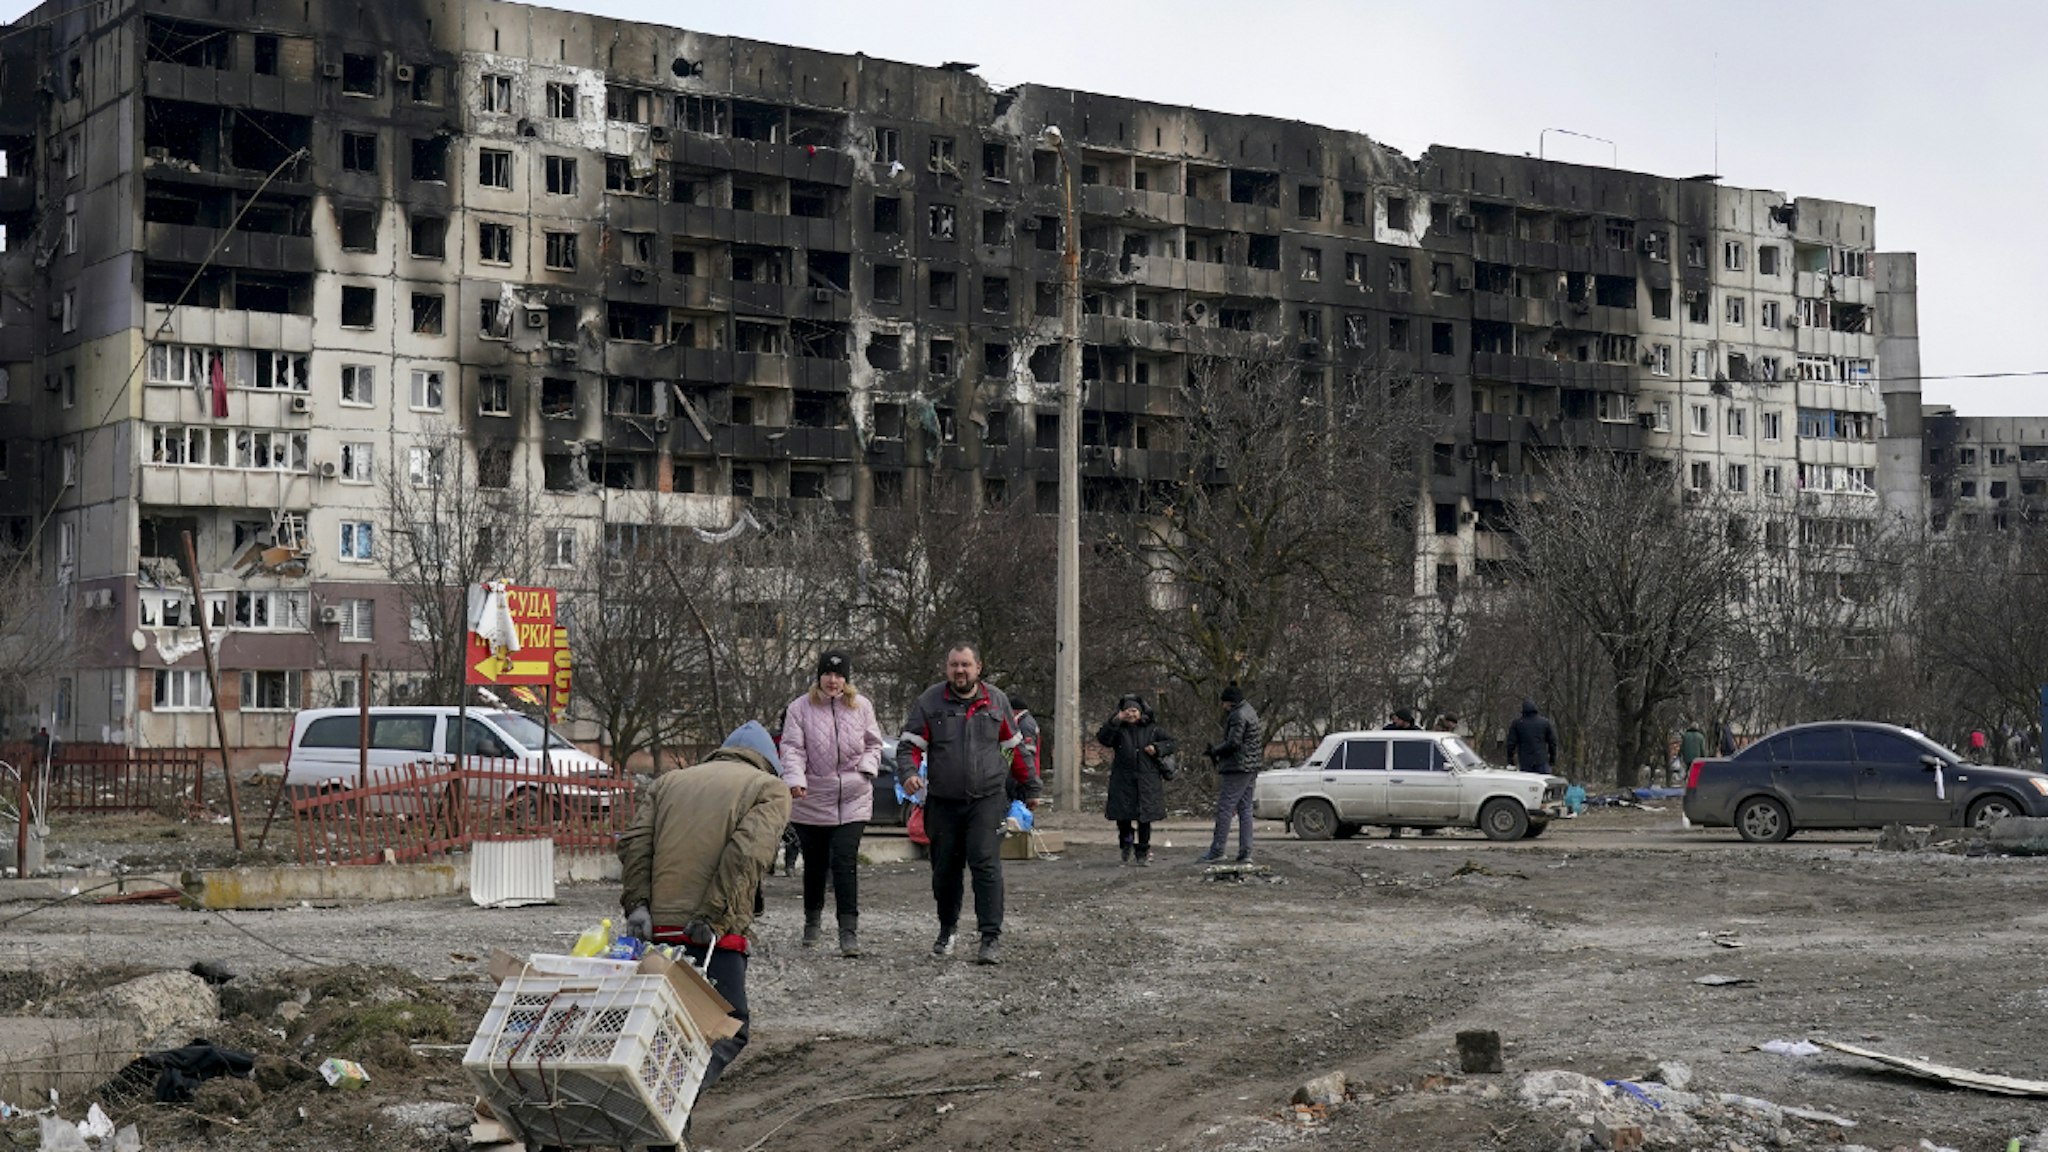 MARIUPOL, UKRAINE - MARCH 20: Civilians trapped in Mariupol city under Russian attacks, are evacuated in groups under the control of pro-Russian separatists, through other cities, in Mariupol, Ukraine on March 20, 2022.